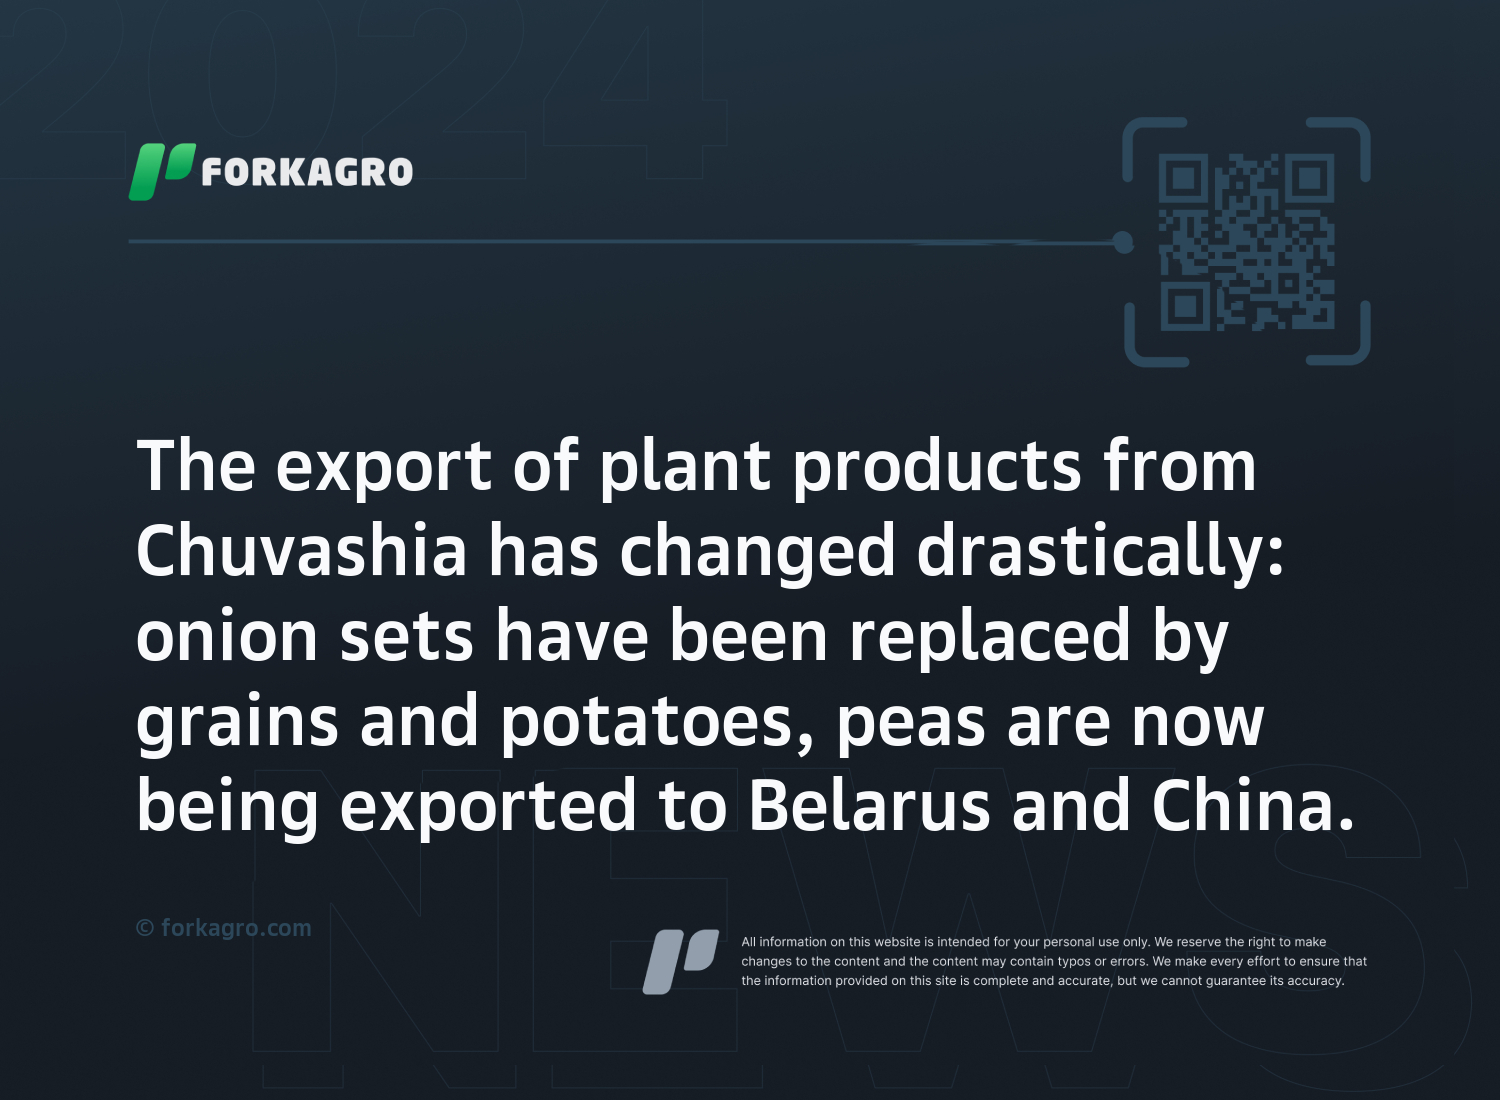 The export of plant products from Chuvashia has changed drastically: onion sets have been replaced by grains and potatoes, peas are now being exported to Belarus and China.